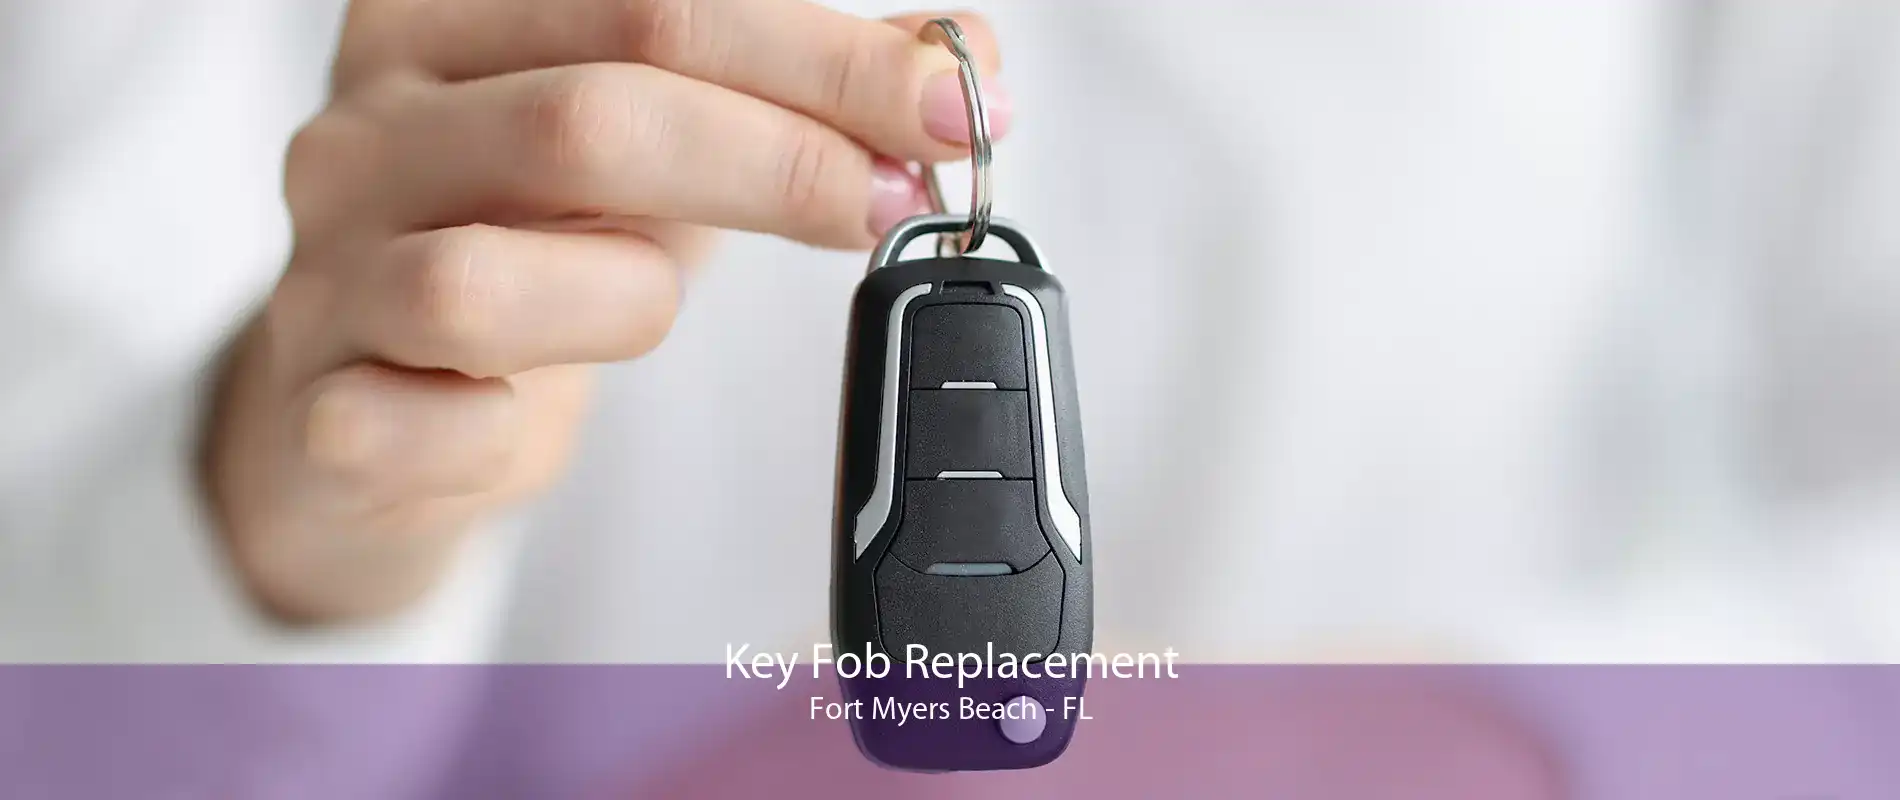 Key Fob Replacement Fort Myers Beach - FL